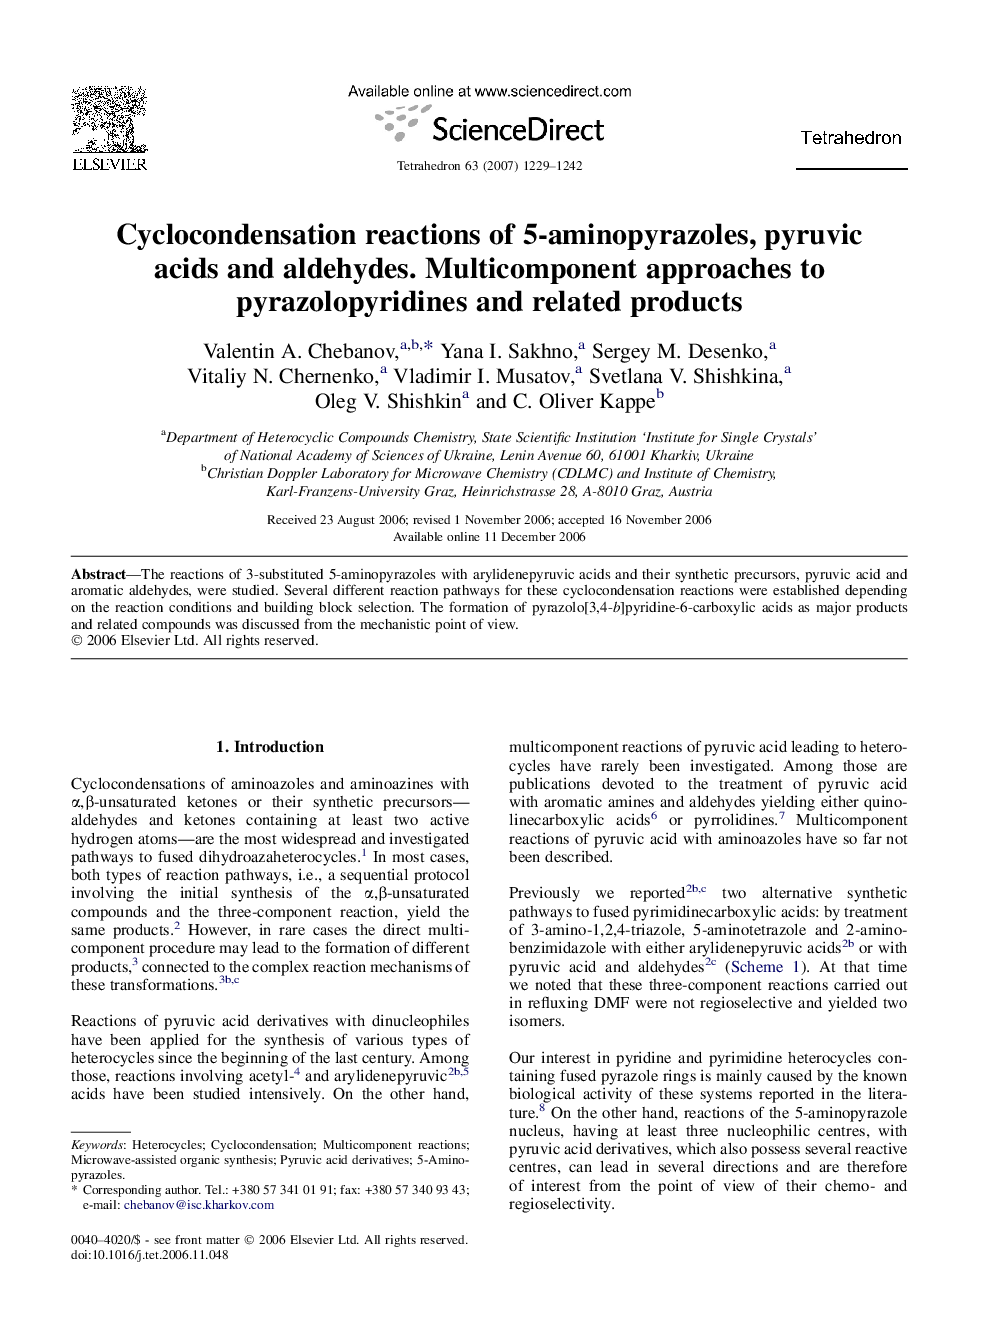 Cyclocondensation reactions of 5-aminopyrazoles, pyruvic acids and aldehydes. Multicomponent approaches to pyrazolopyridines and related products